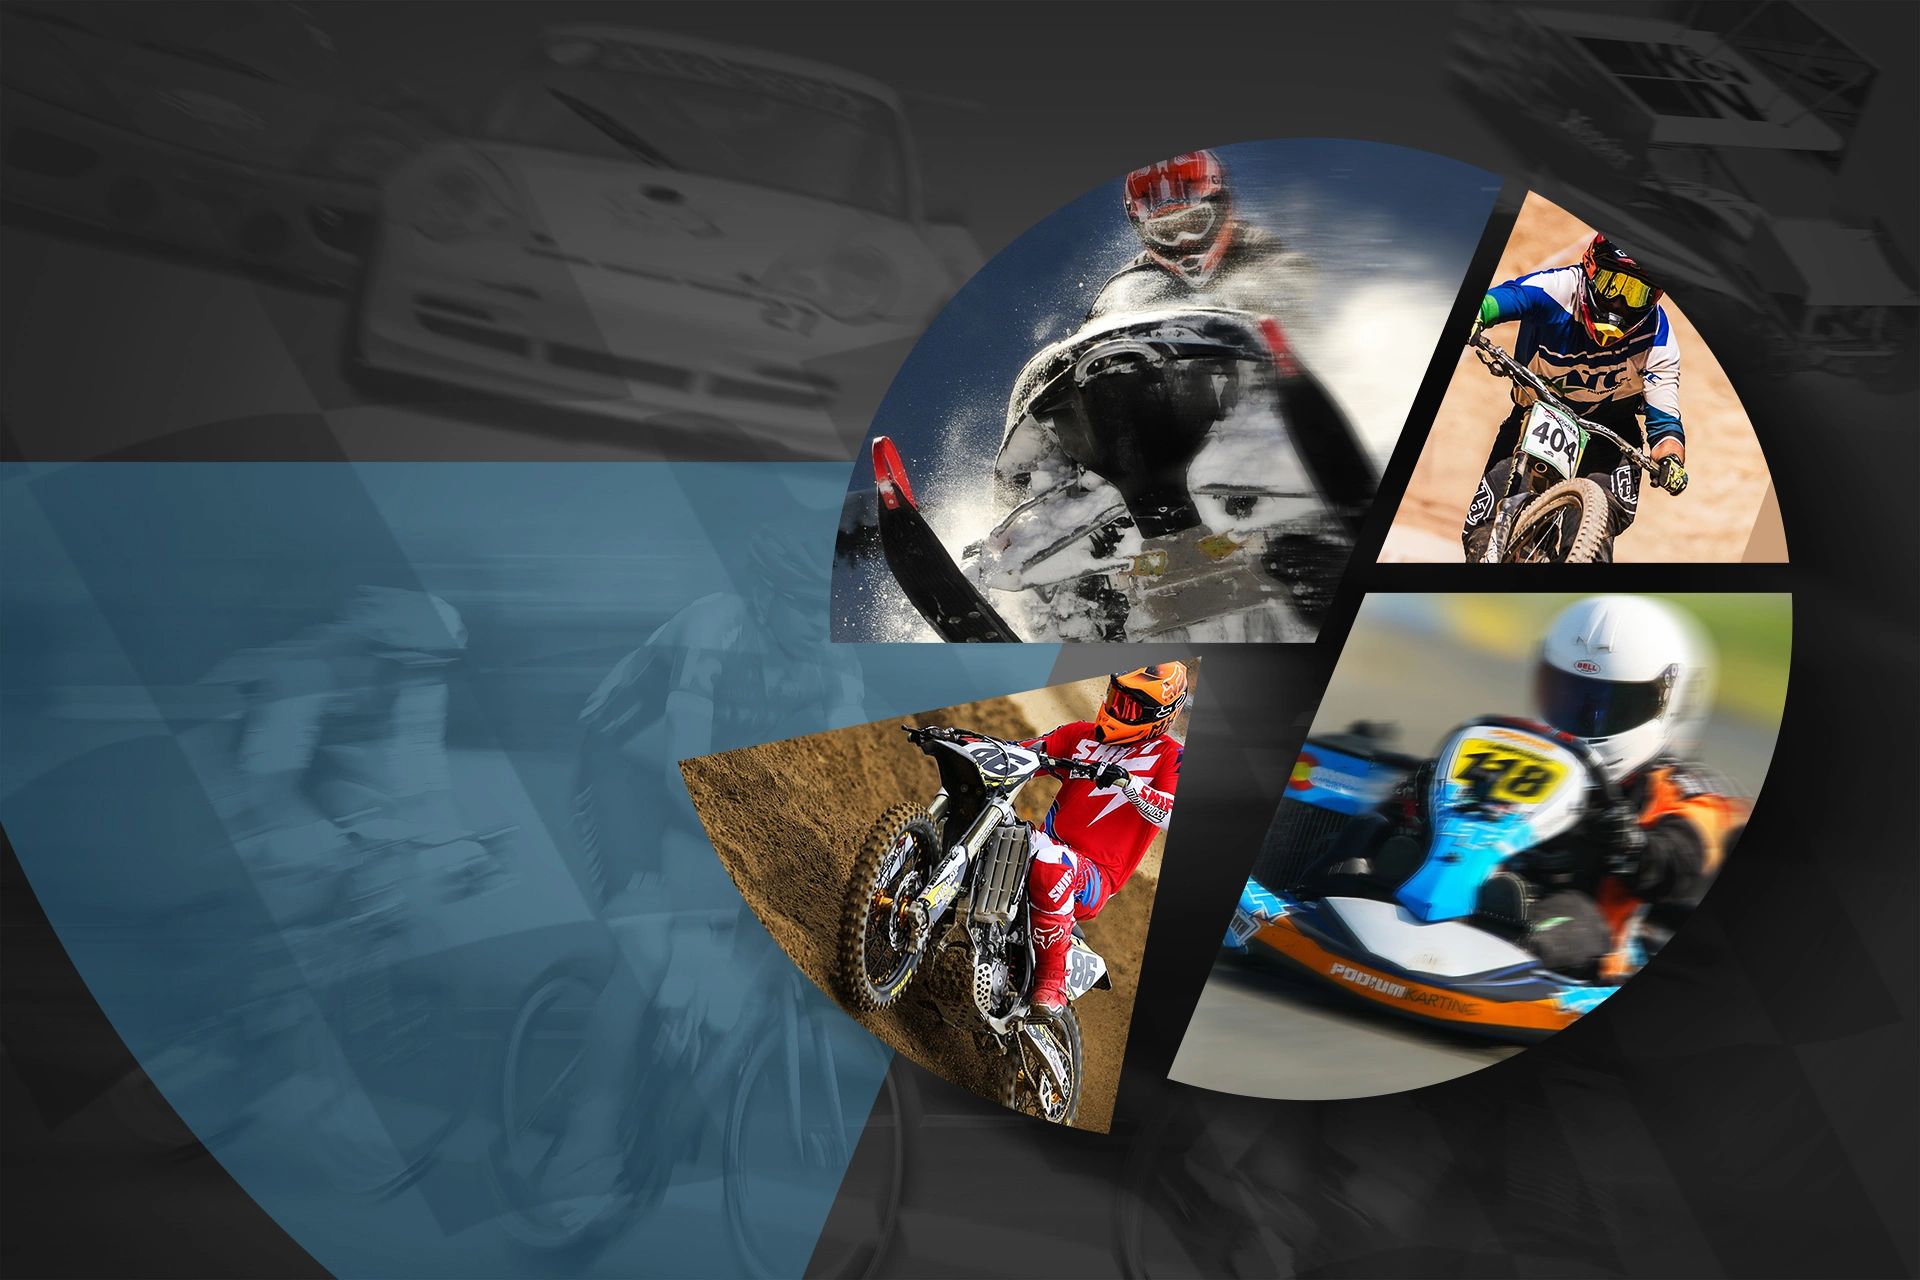 Hi-Performance RFID scoring and timing systems for snowmobile, motocross, karting, racing and more.
